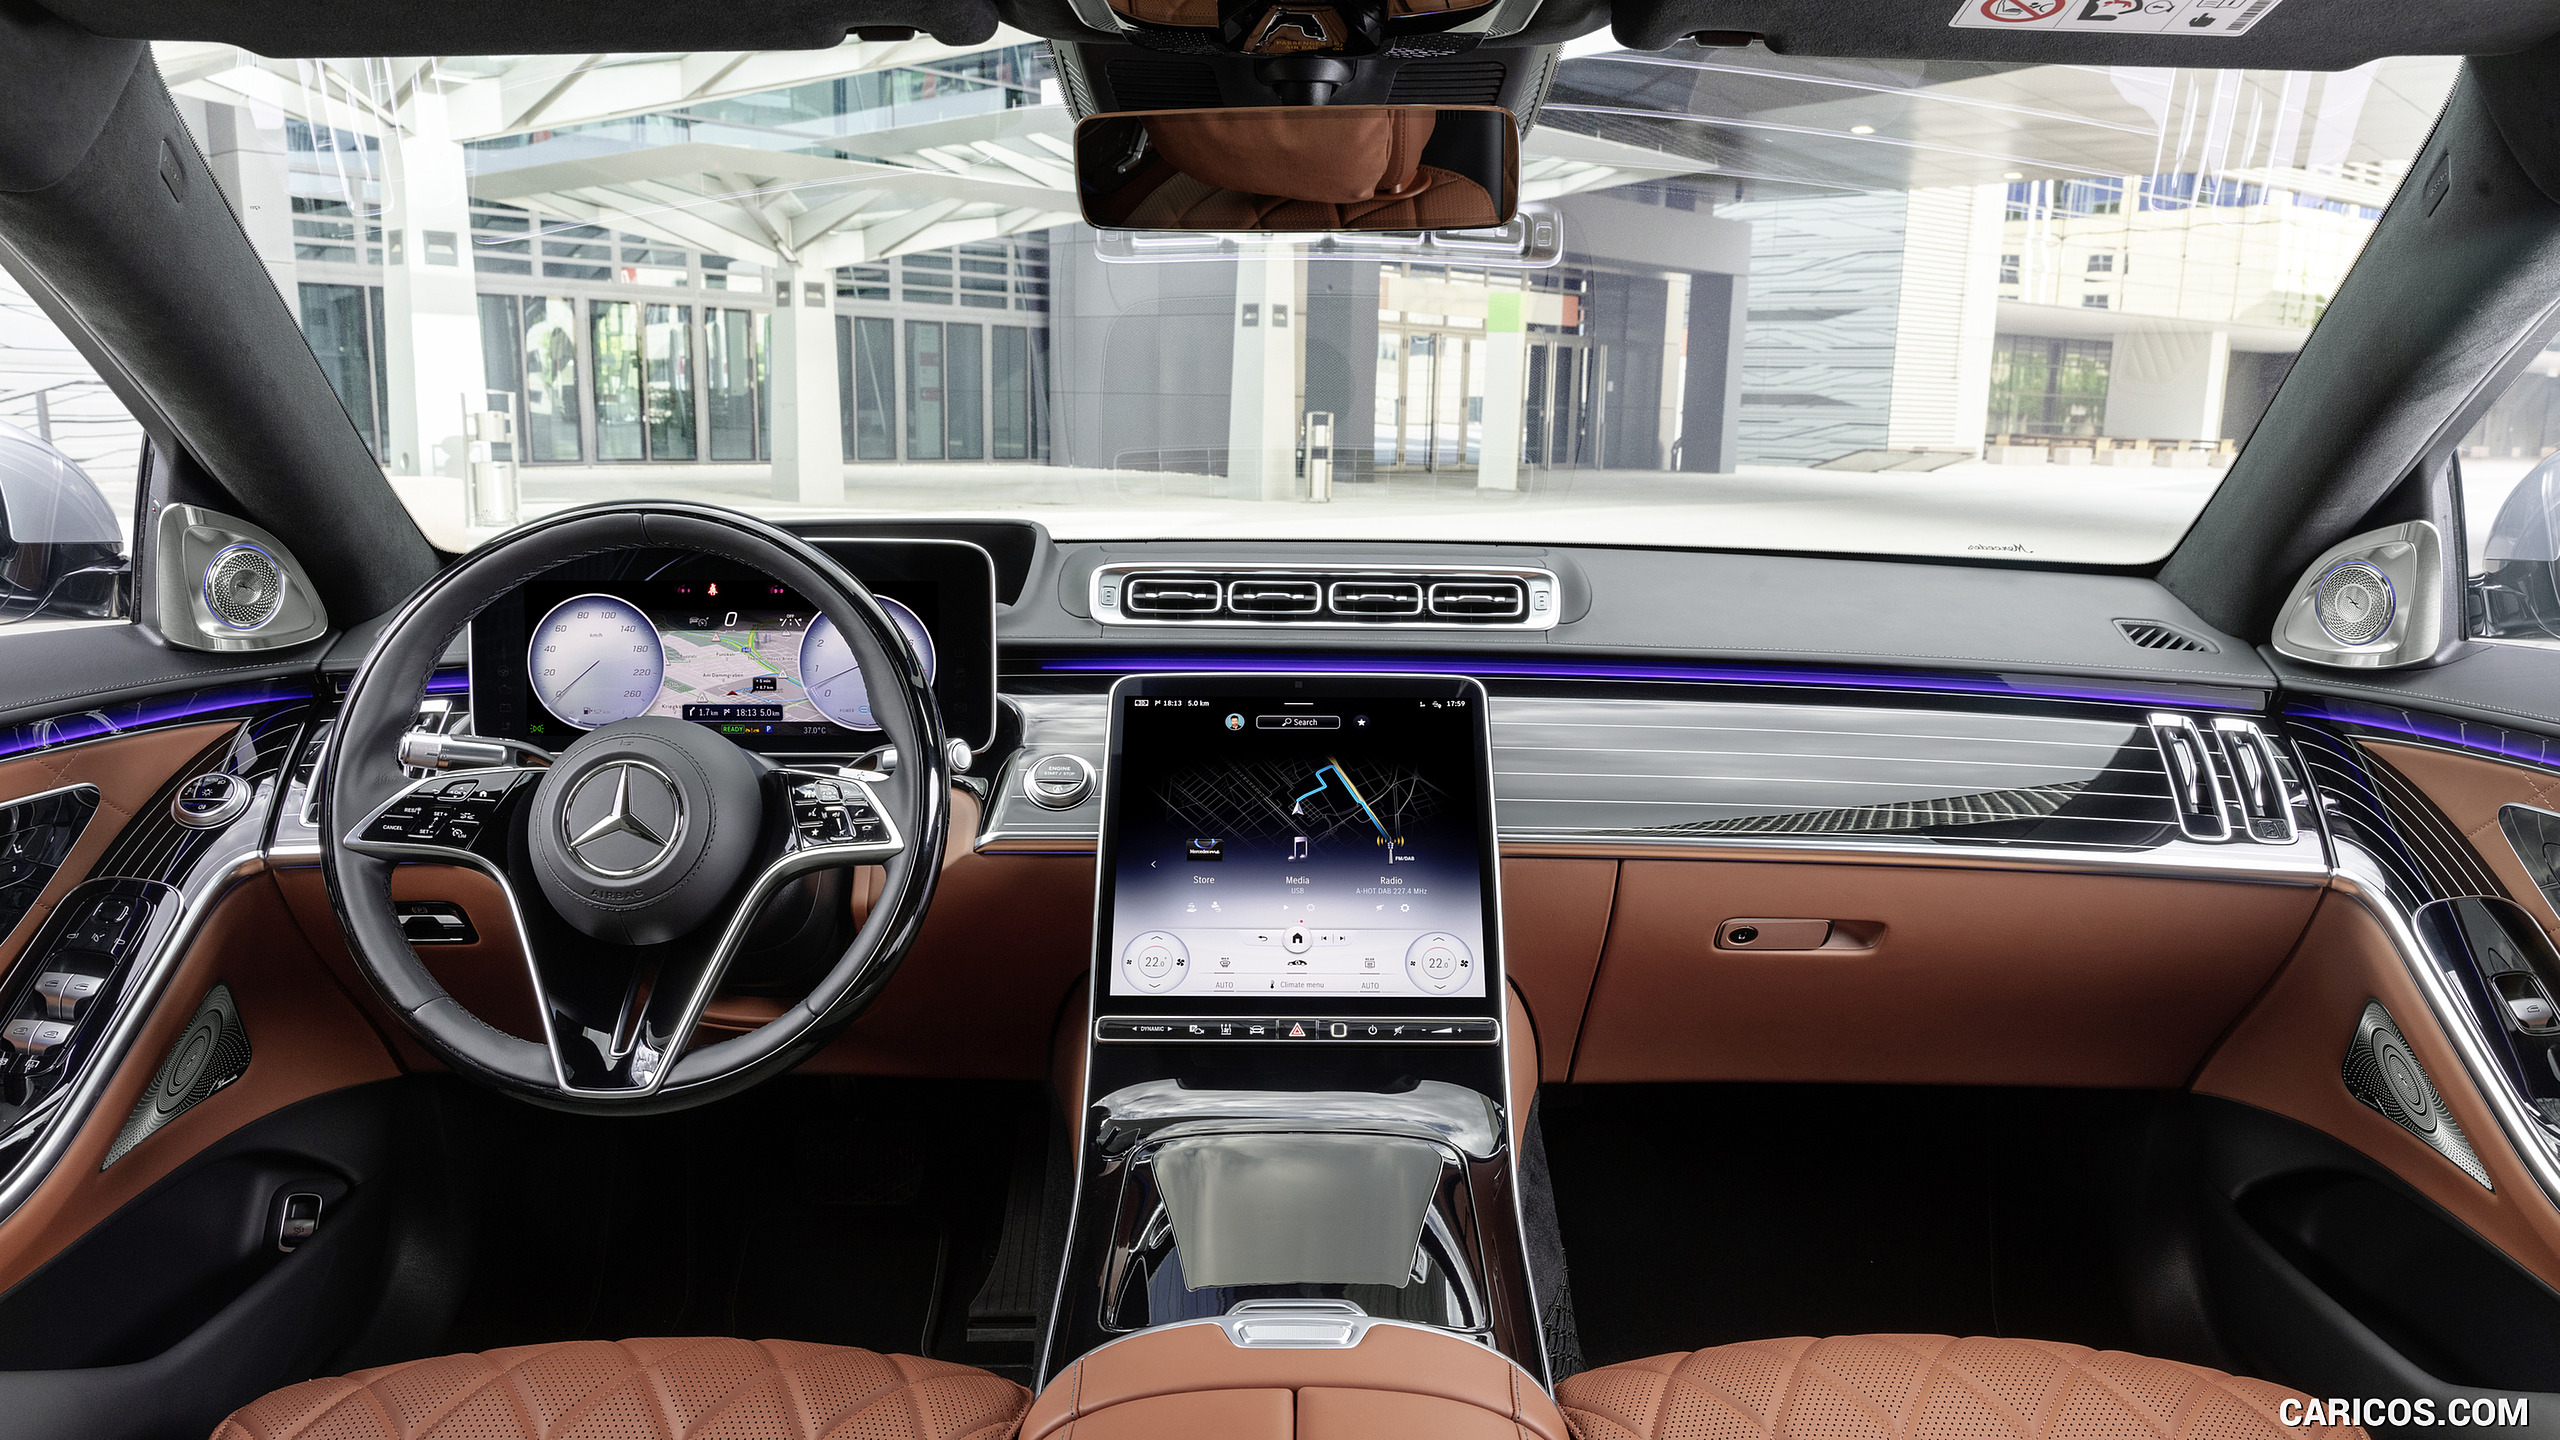 2021 Mercedes-Benz S-Class (Color: Leather Siena Brown) - Interior, Cockpit, #109 of 316